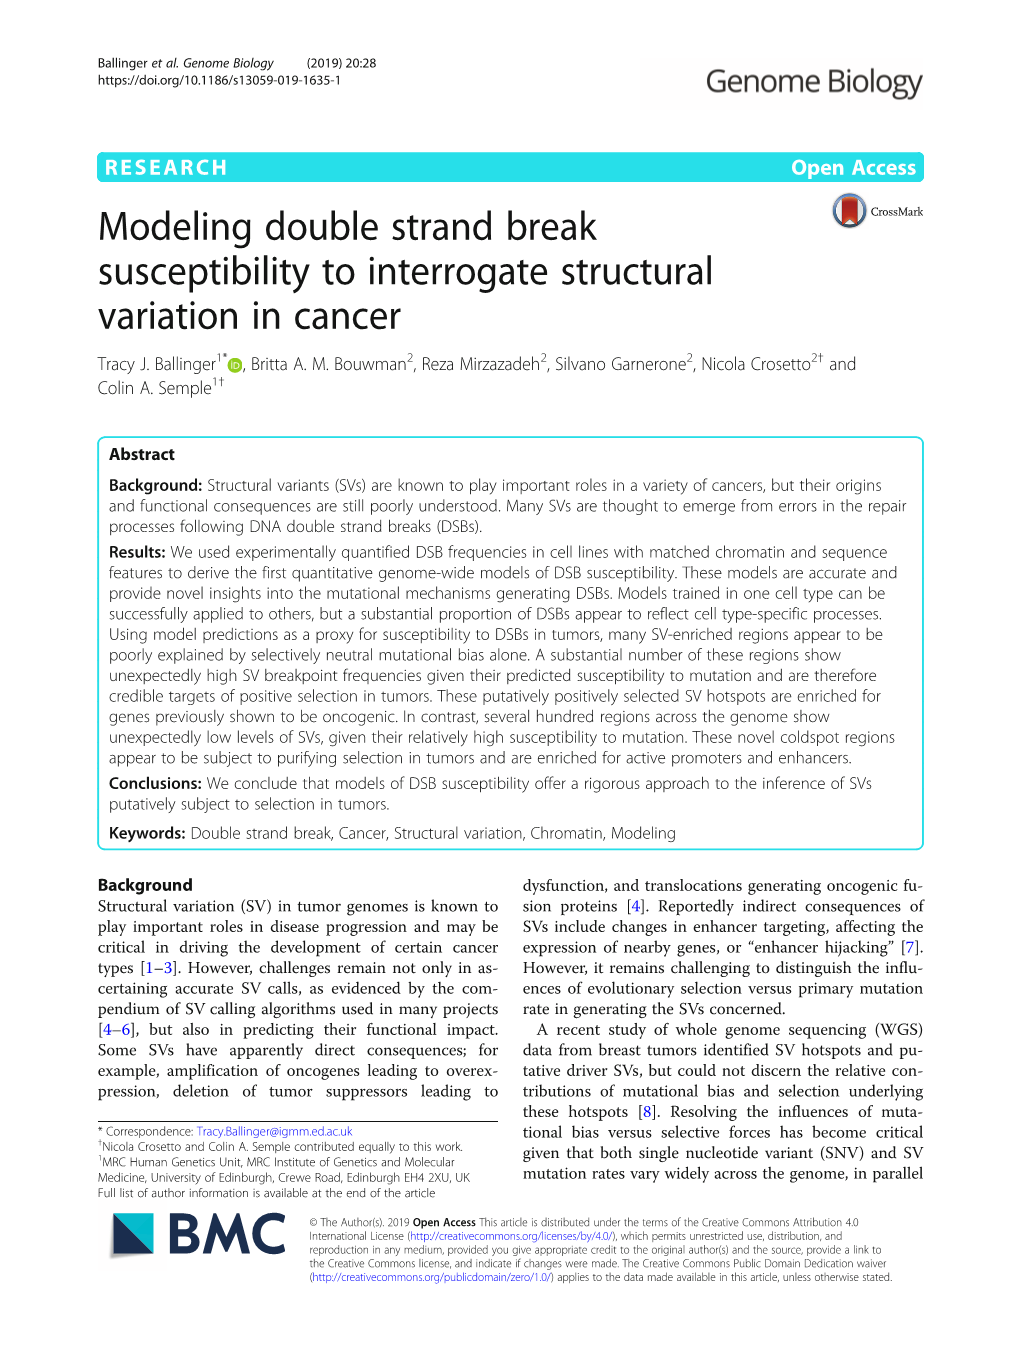 Modeling Double Strand Break Susceptibility to Interrogate Structural Variation in Cancer Tracy J